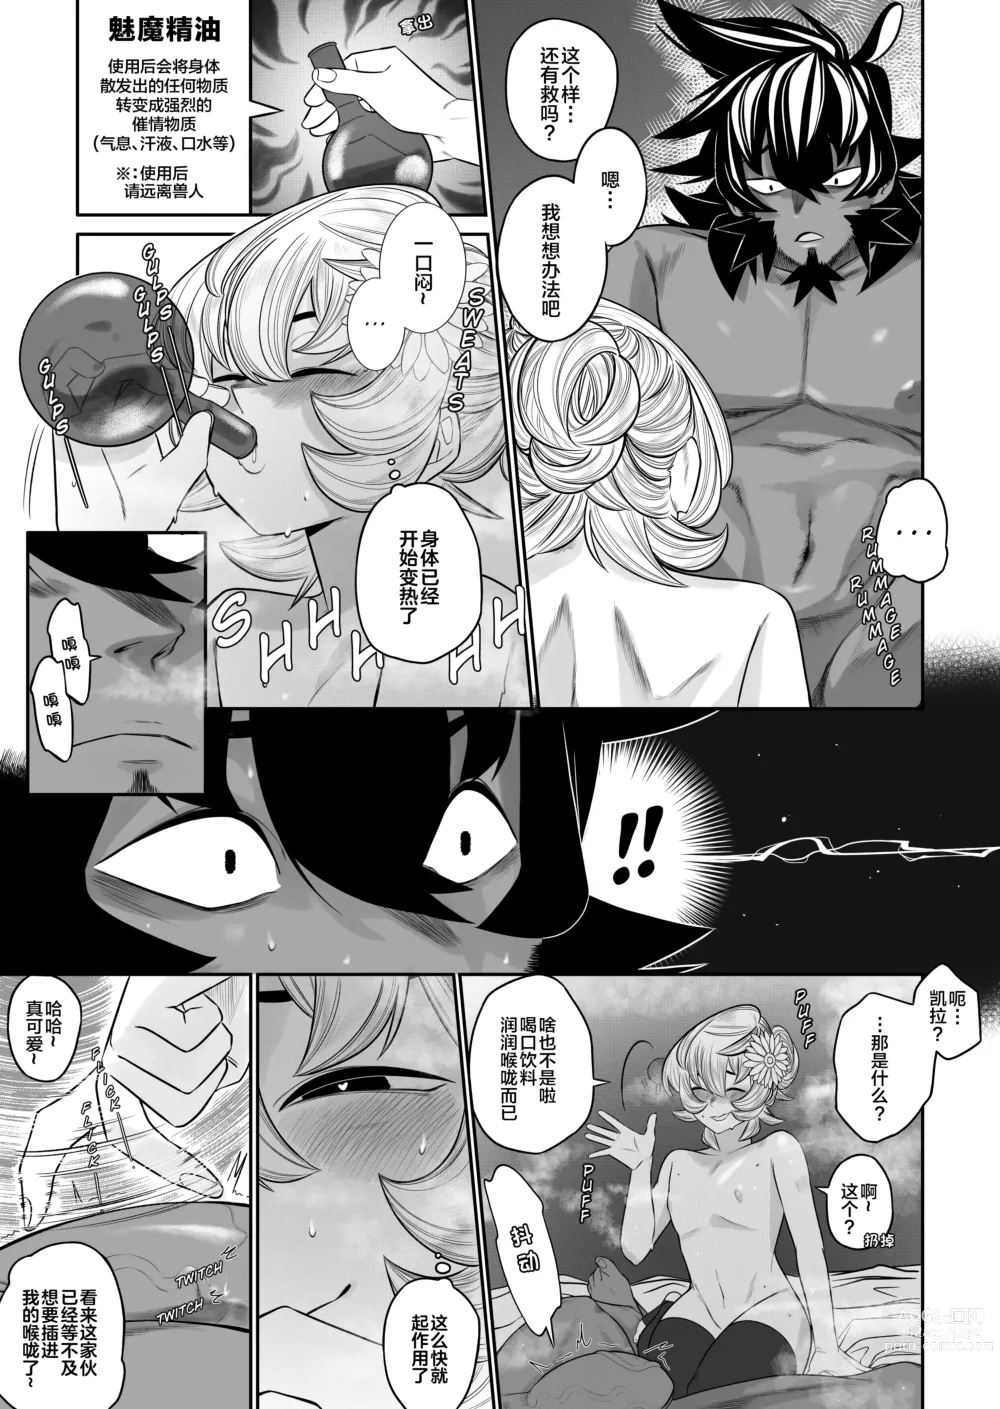 Page 5 of doujinshi 狡猾小恶魔